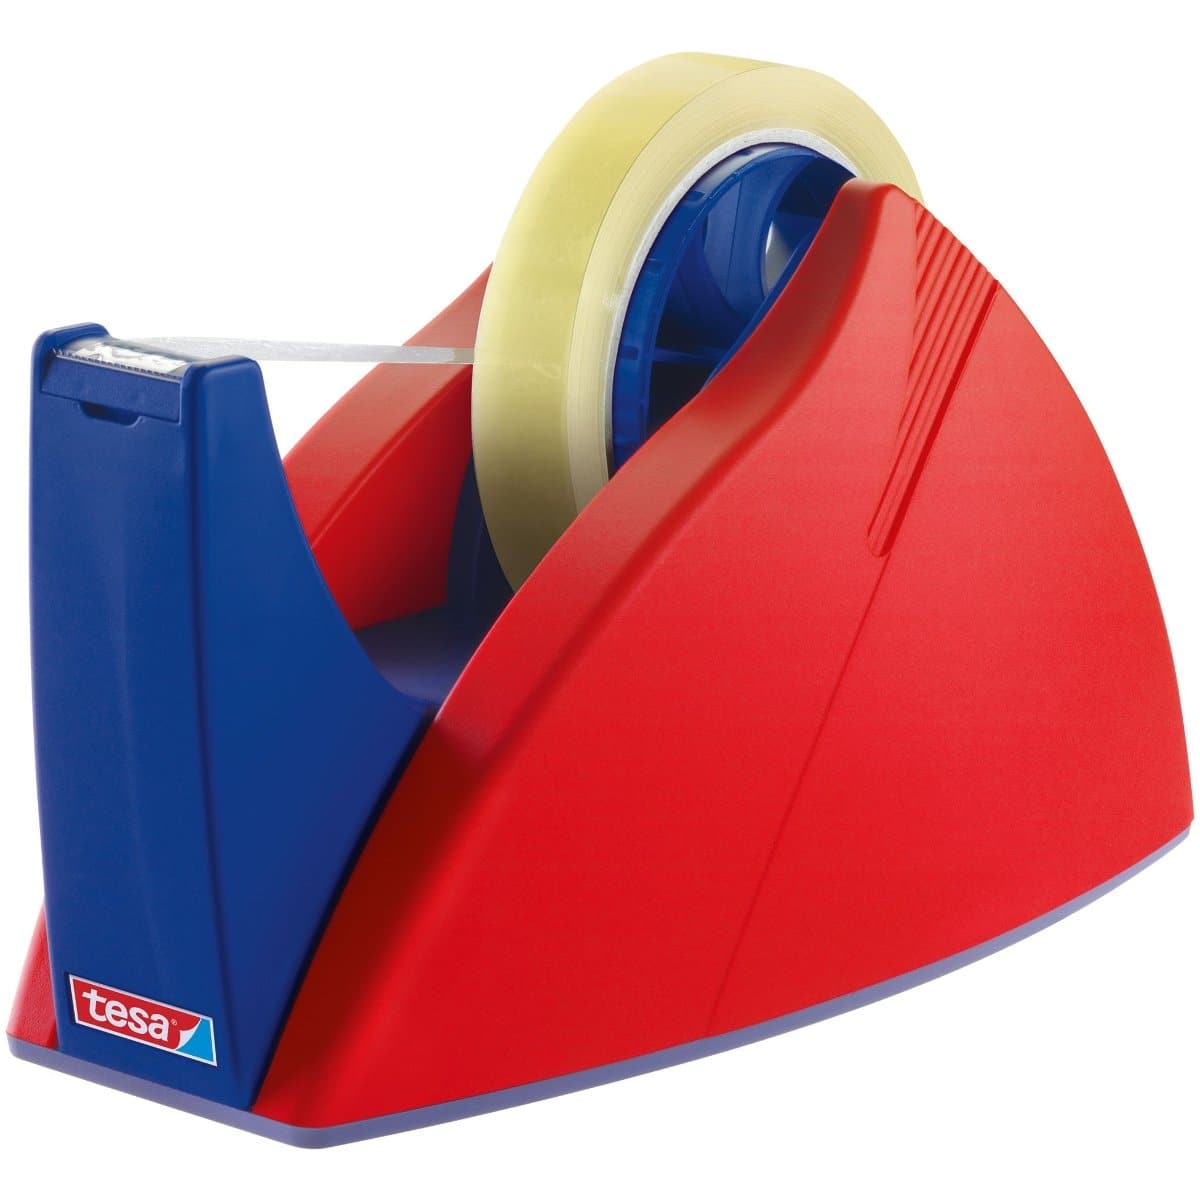 tesa EASY CUT PROFESSIONAL, Desk Dispenser for Tapes up to 25mm x 66m, Red/Blue